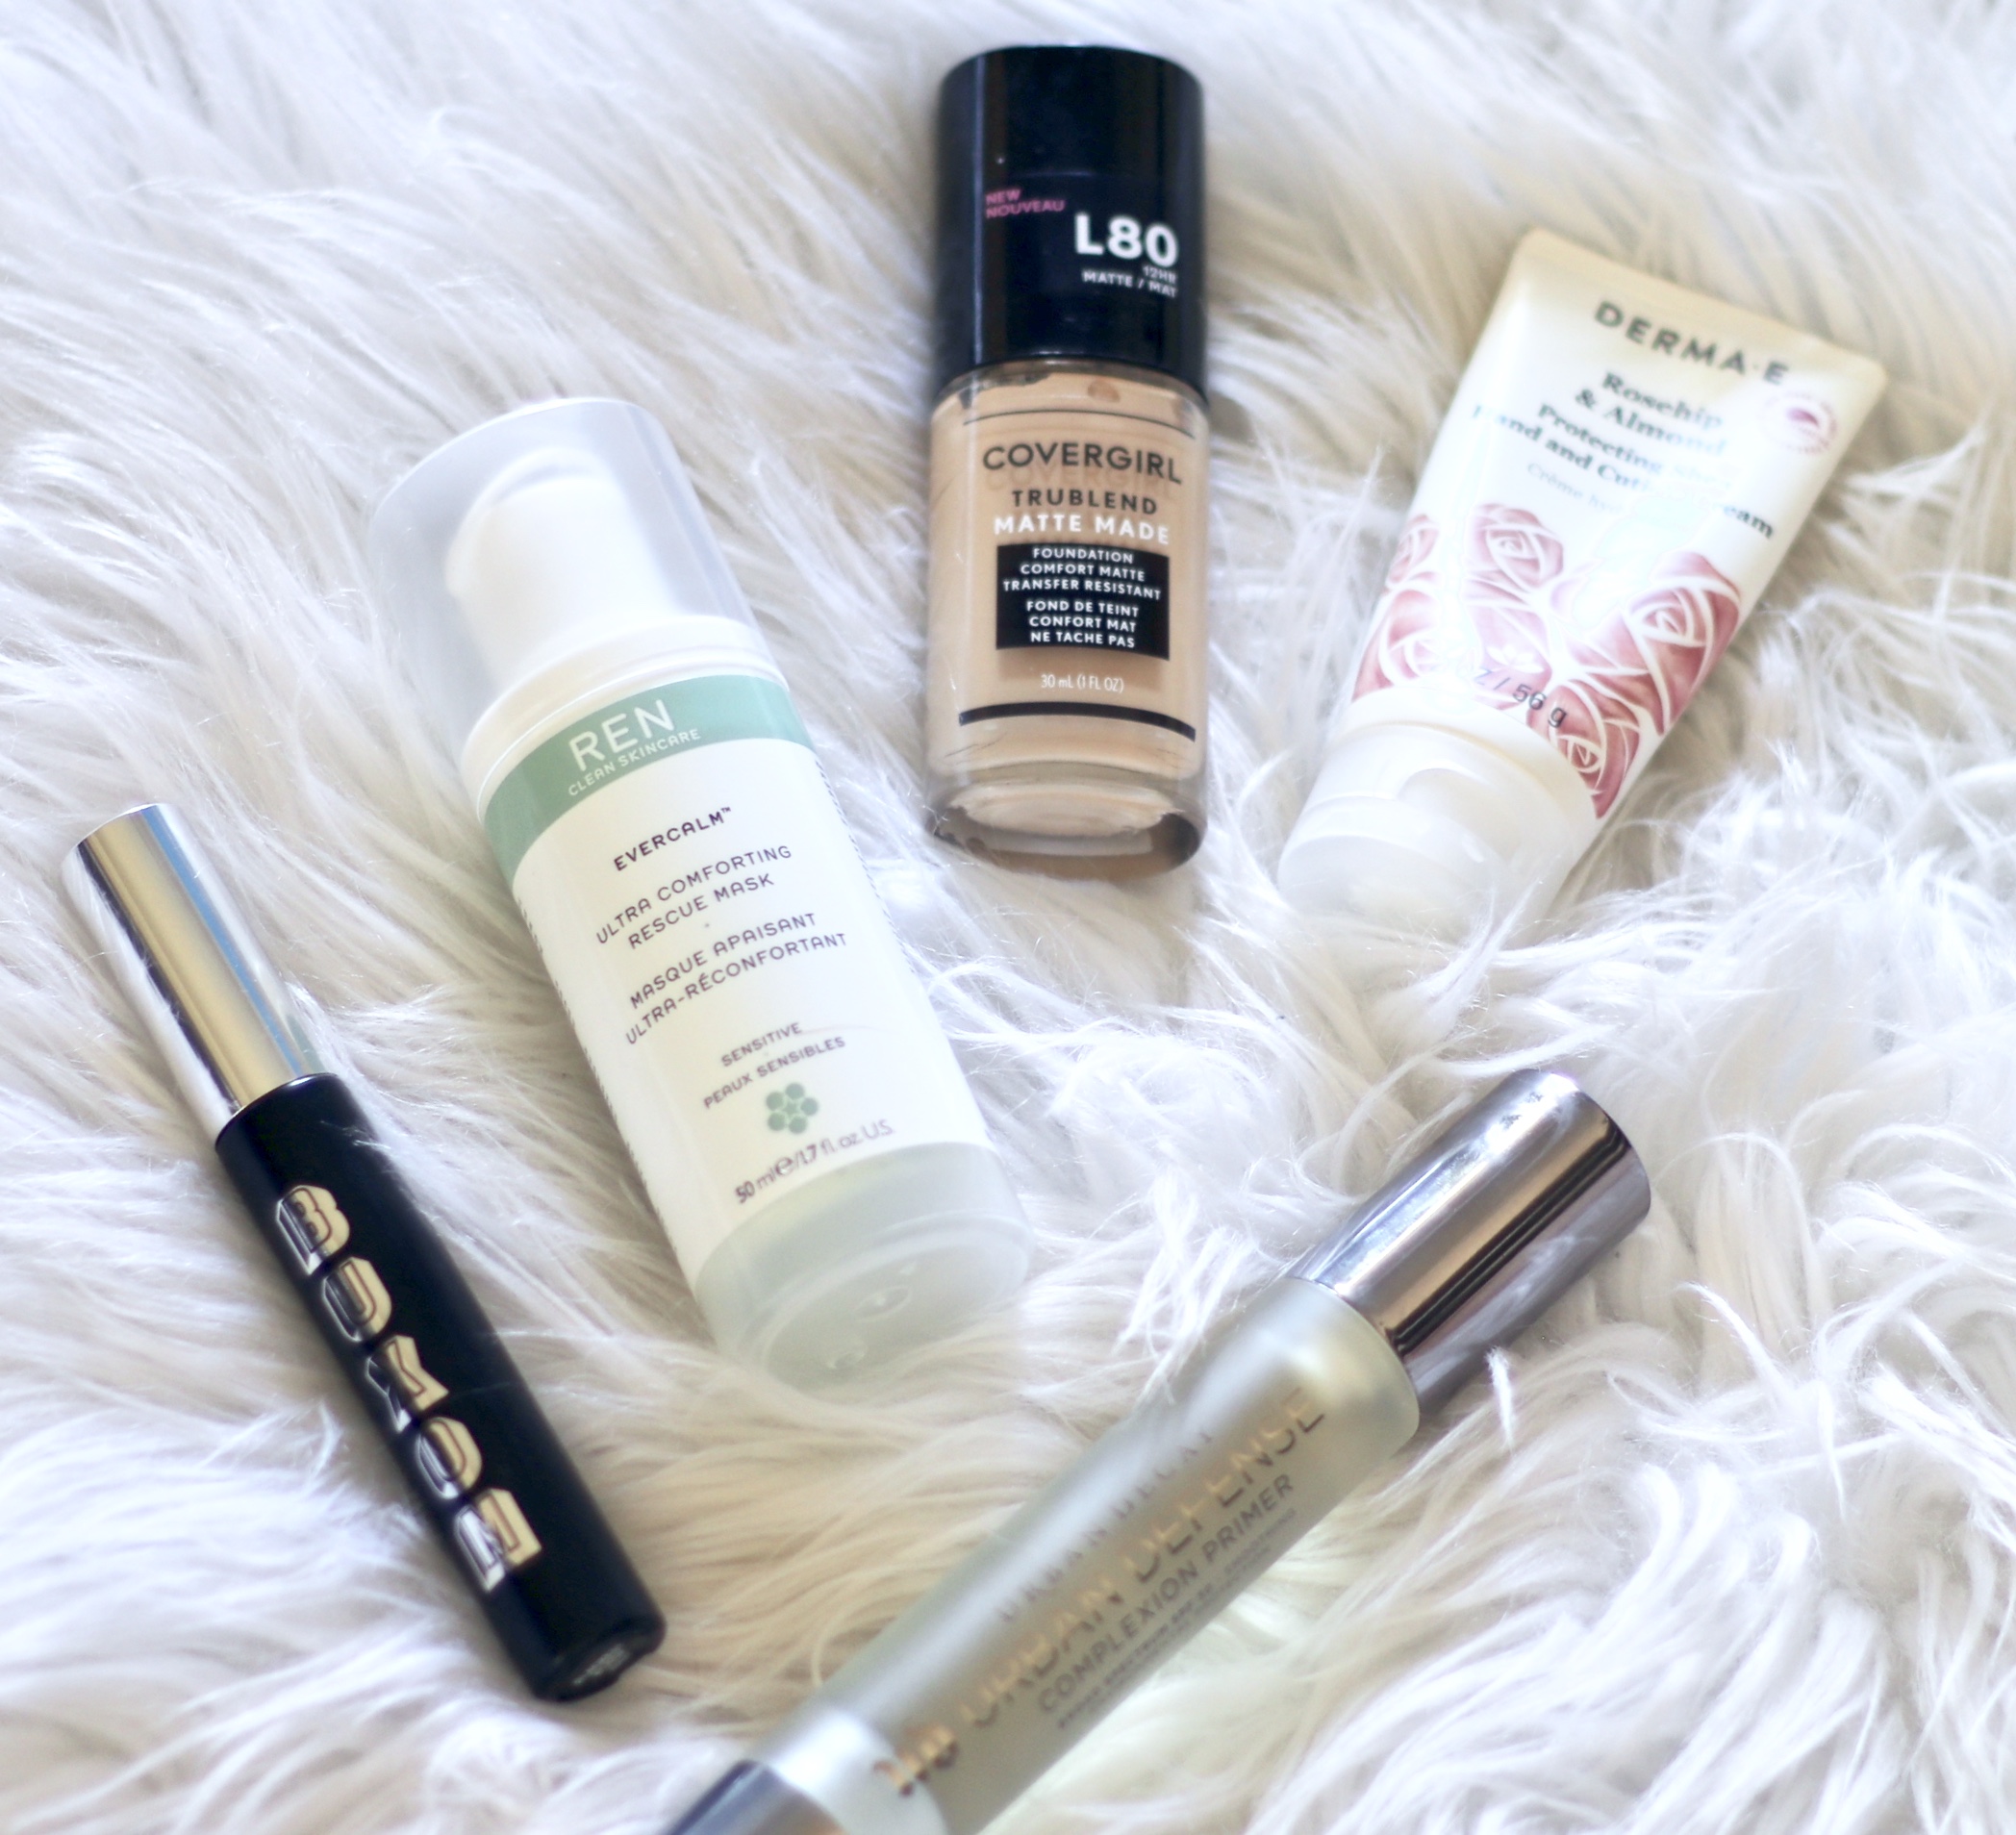 beauty product hits and misses #beauty #skincare #makeup